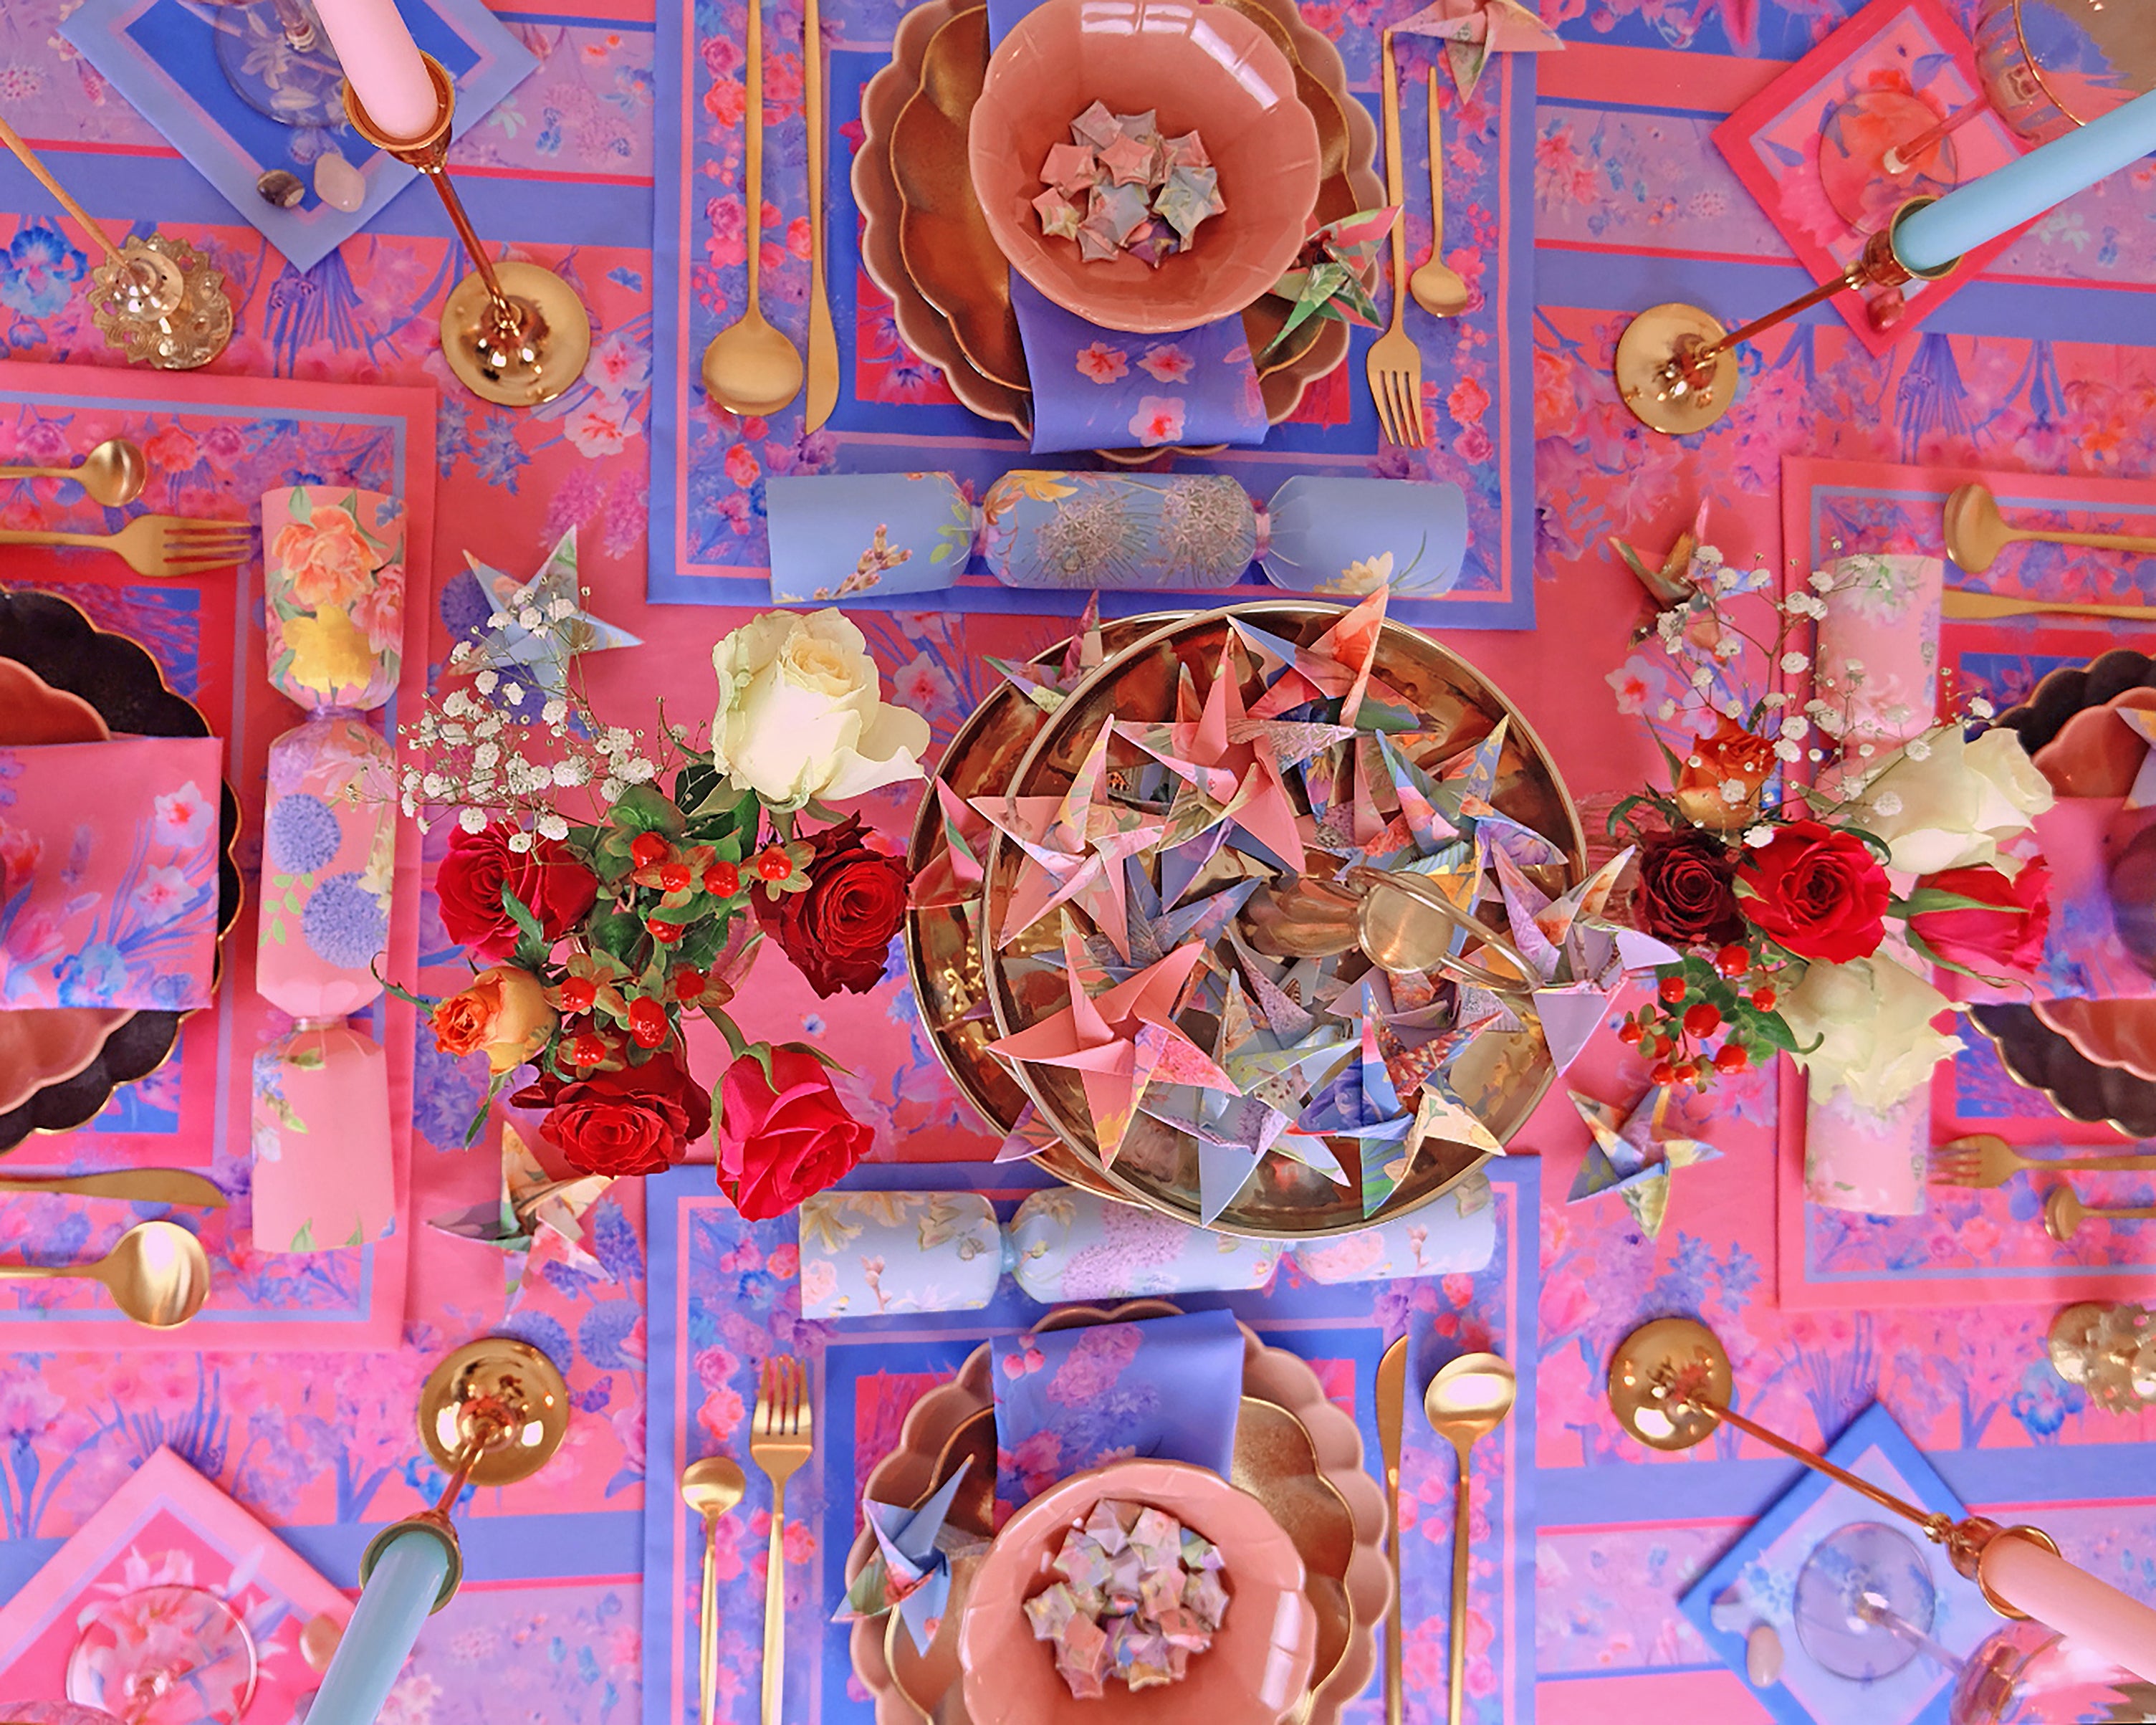 wallpaper origami starts and crackers with luxury illustrated floral napkins and tablecloth 